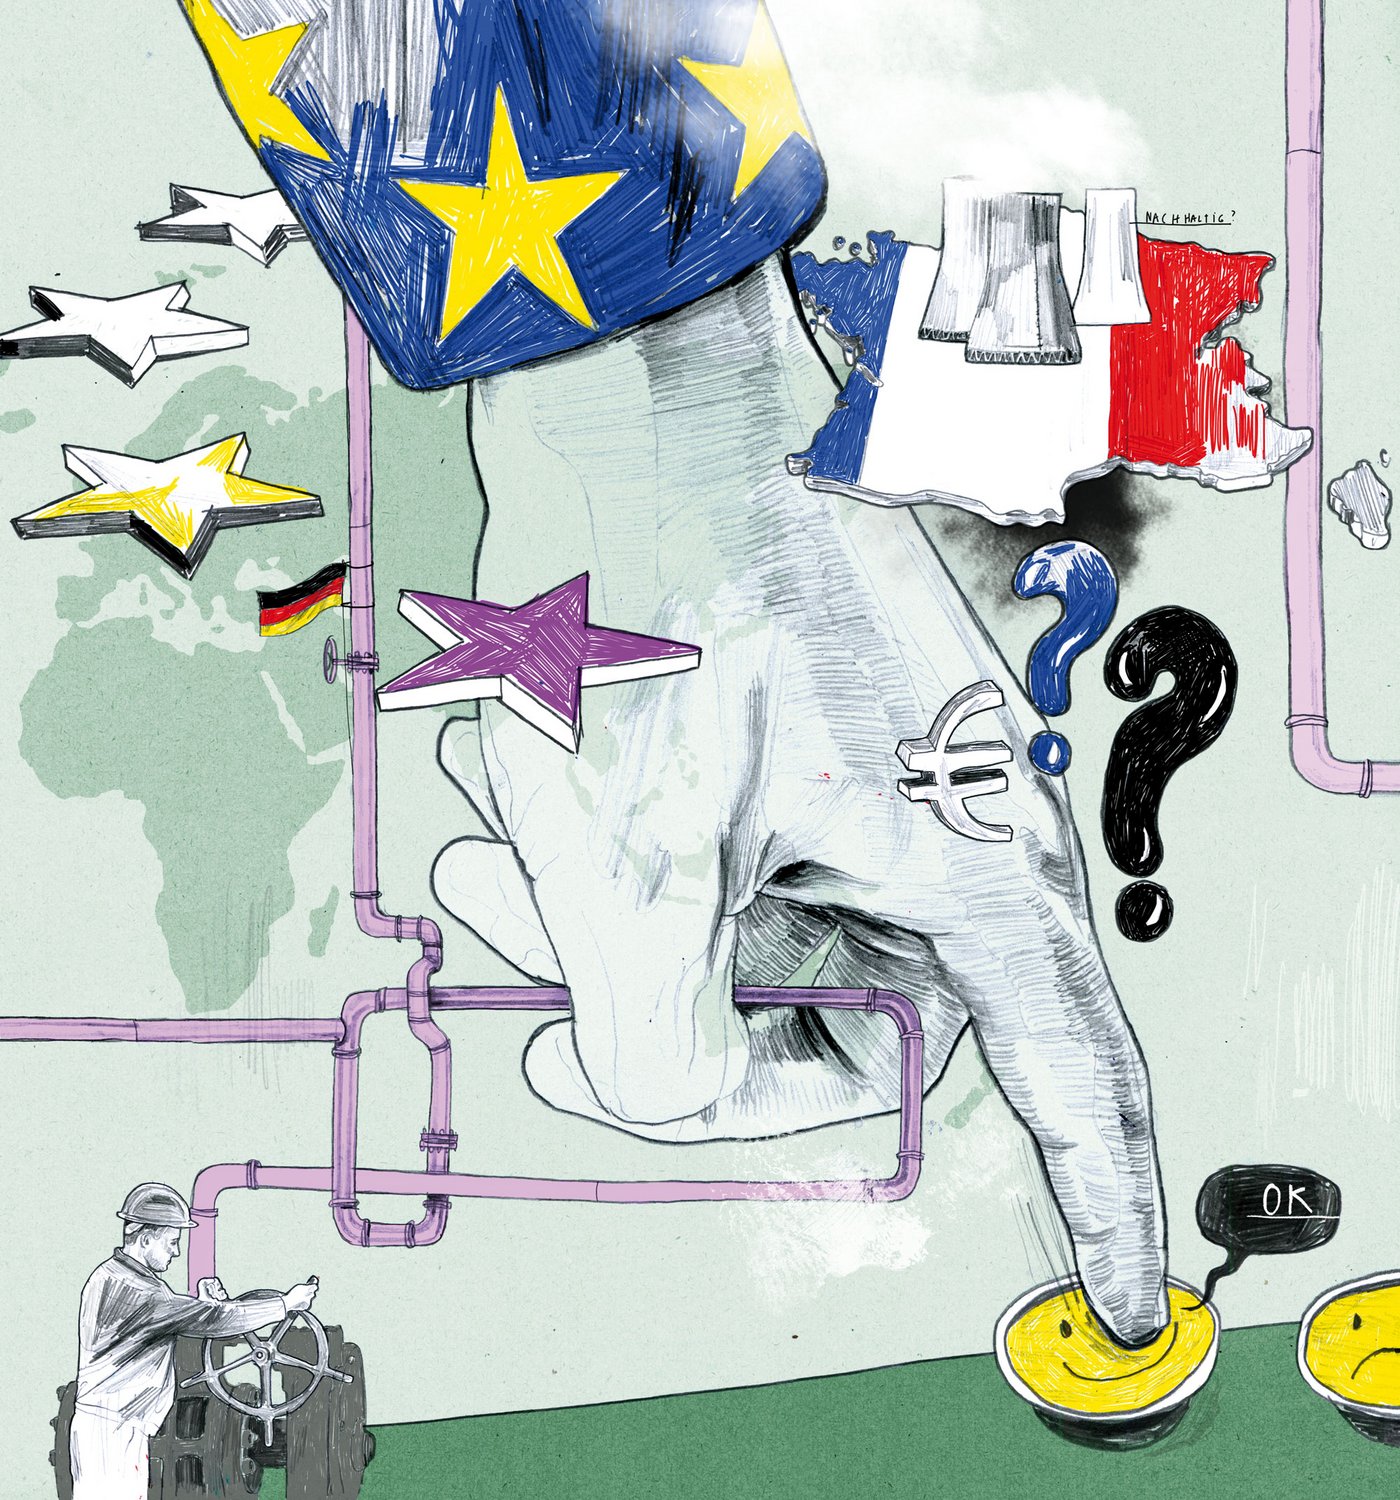 Illustration of EU stars, the French region on which nuclear power plants stand, pipelines on which a German flag hangs and a large hand sticking out of an EU-colored blazer and pressing a button.